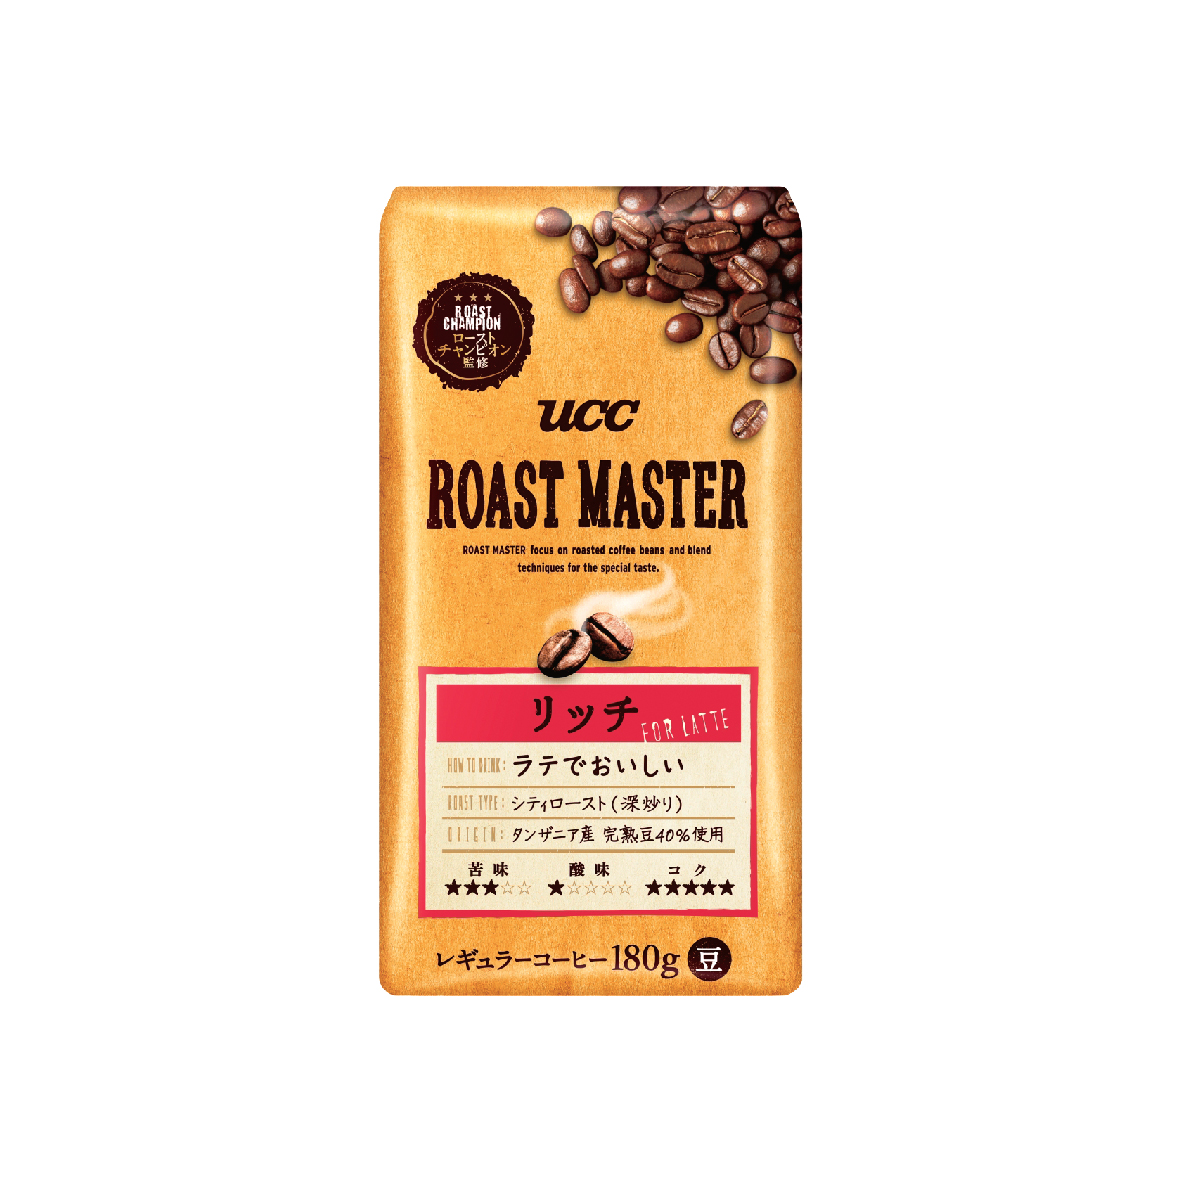 UCC Roast Master Rich Coffee Blend Roasted Coffee Beans